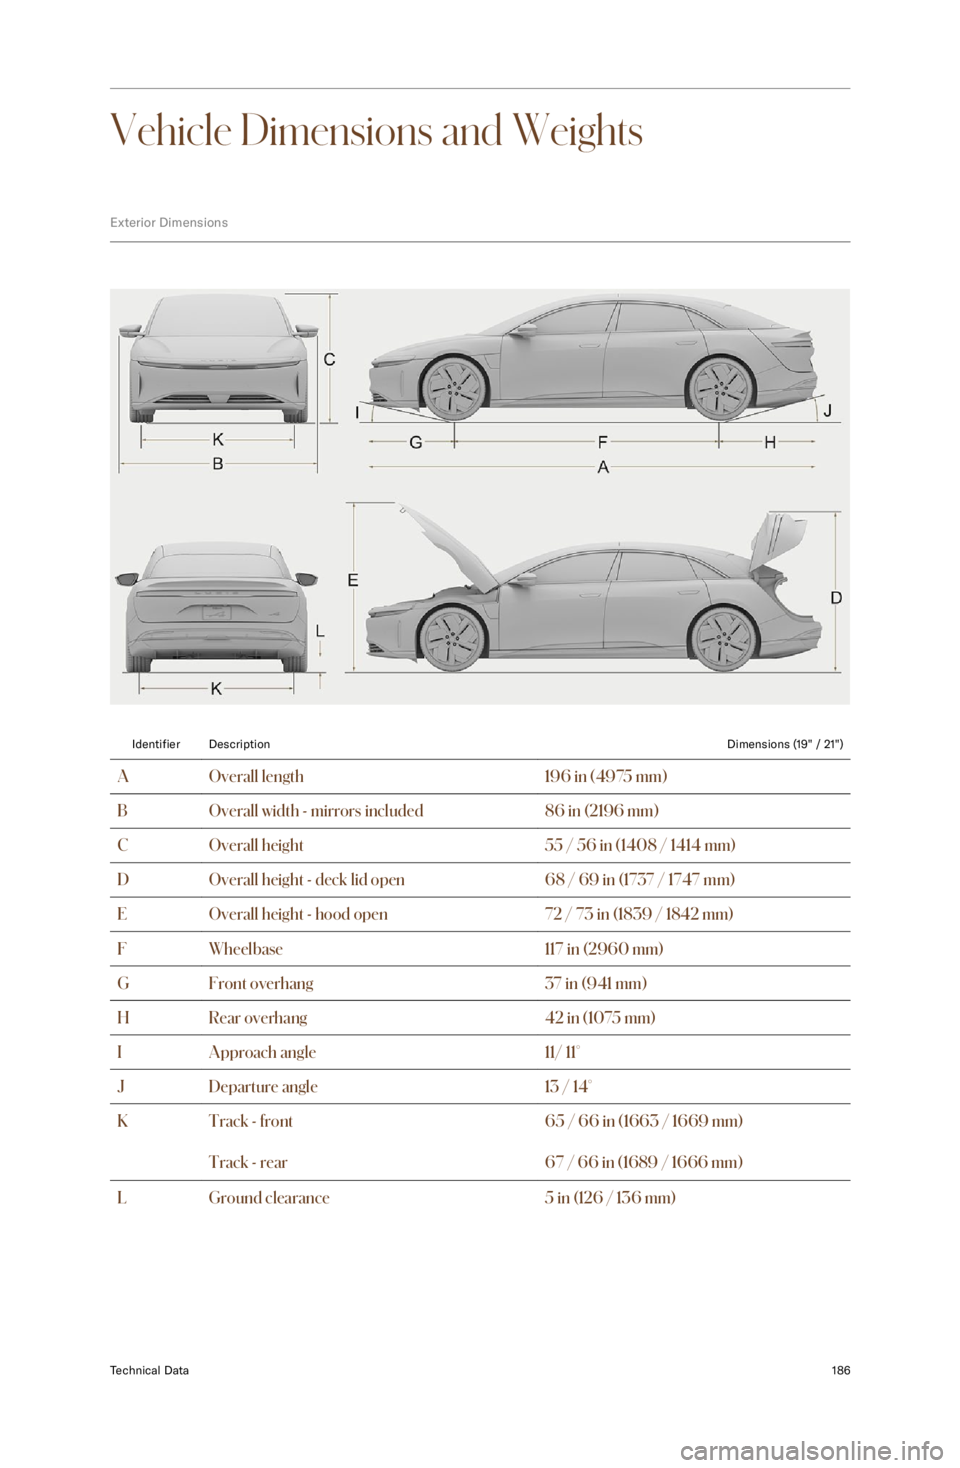 LUCID AIR 2022  Owners Manual Vehicle Dimensions and Weights
Exterior DimensionsIdentifierDescriptionDimensions (19" / 21")AOverall length196 in (4975 mm)BOverall width - mirrors included86 in (2196 mm)COverall height55 / 56 in (1